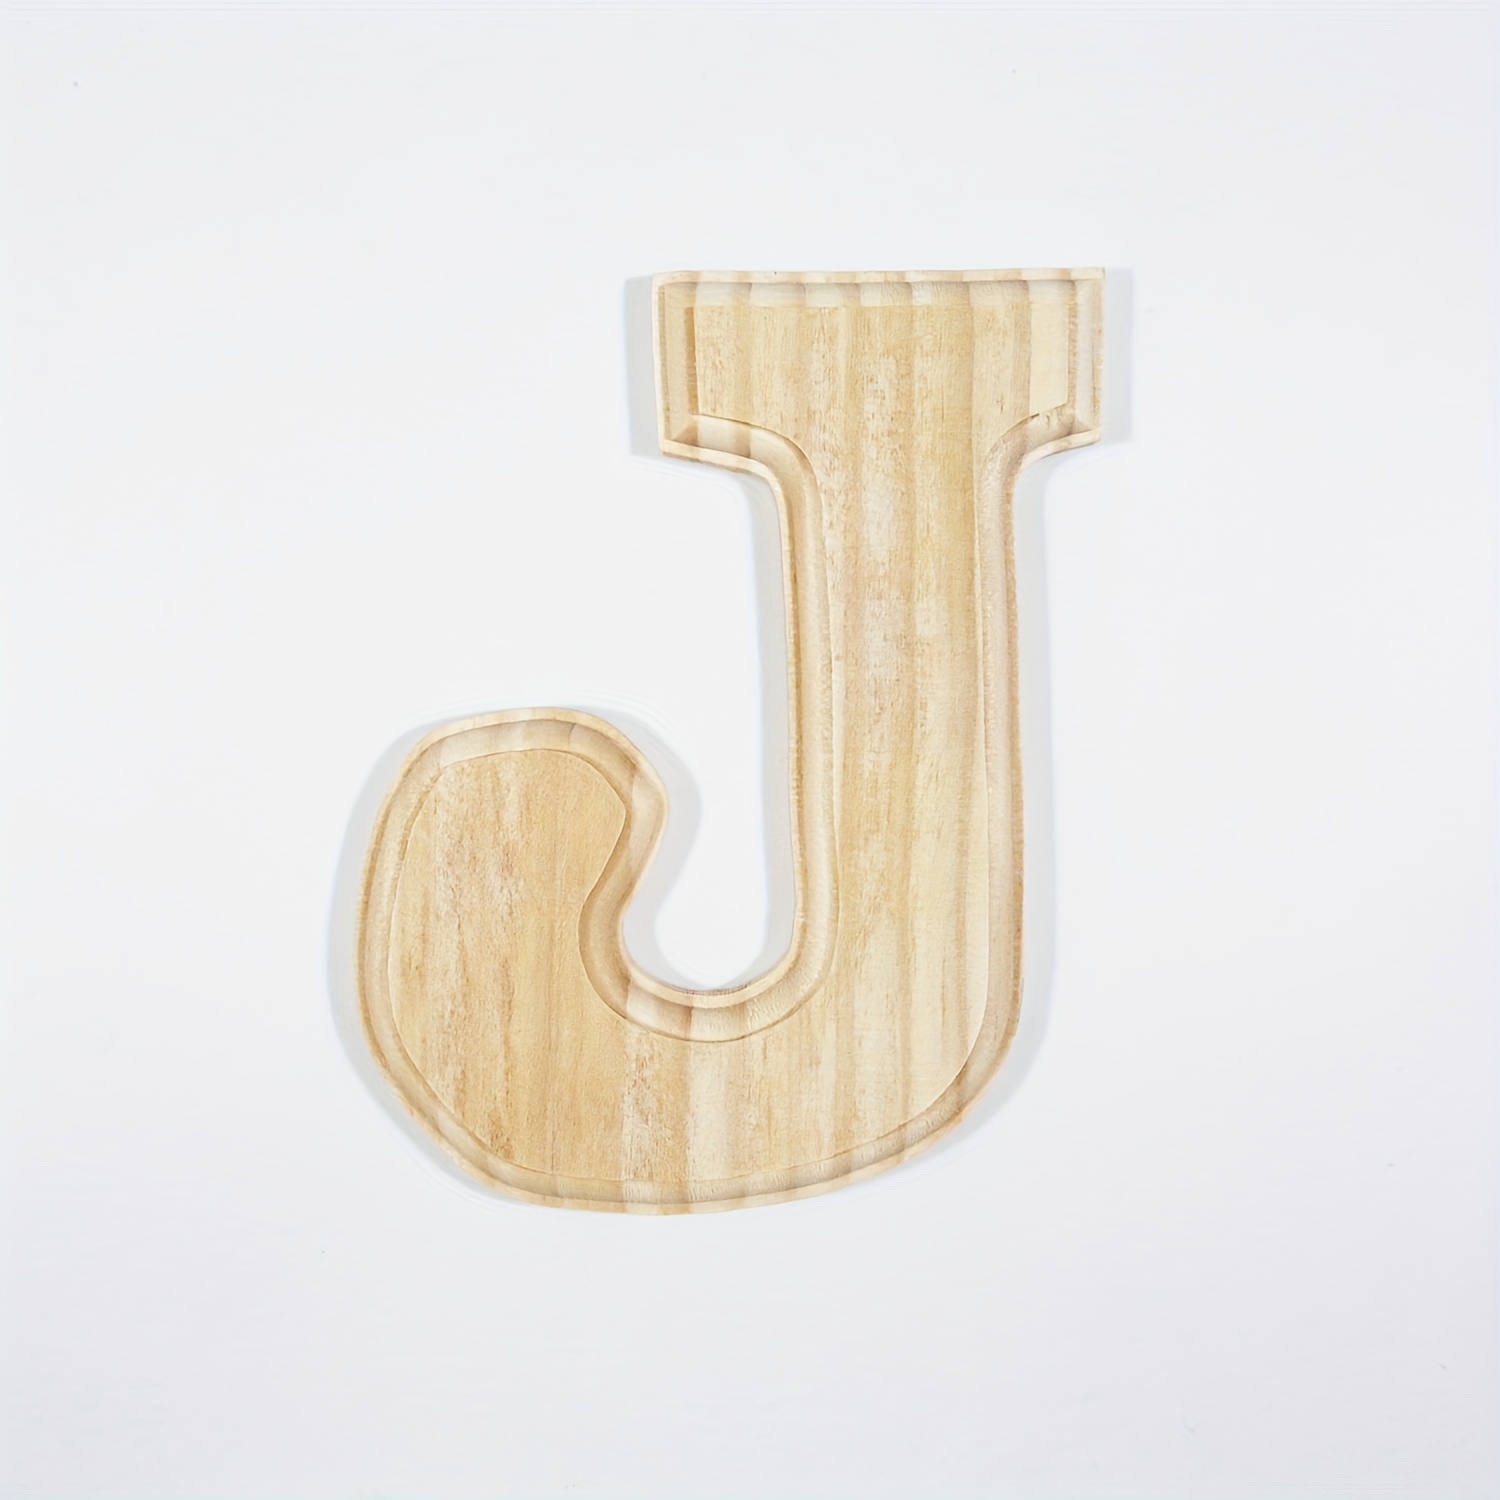 Wood Letters Wooden Letters Decorative Wooden - Temu